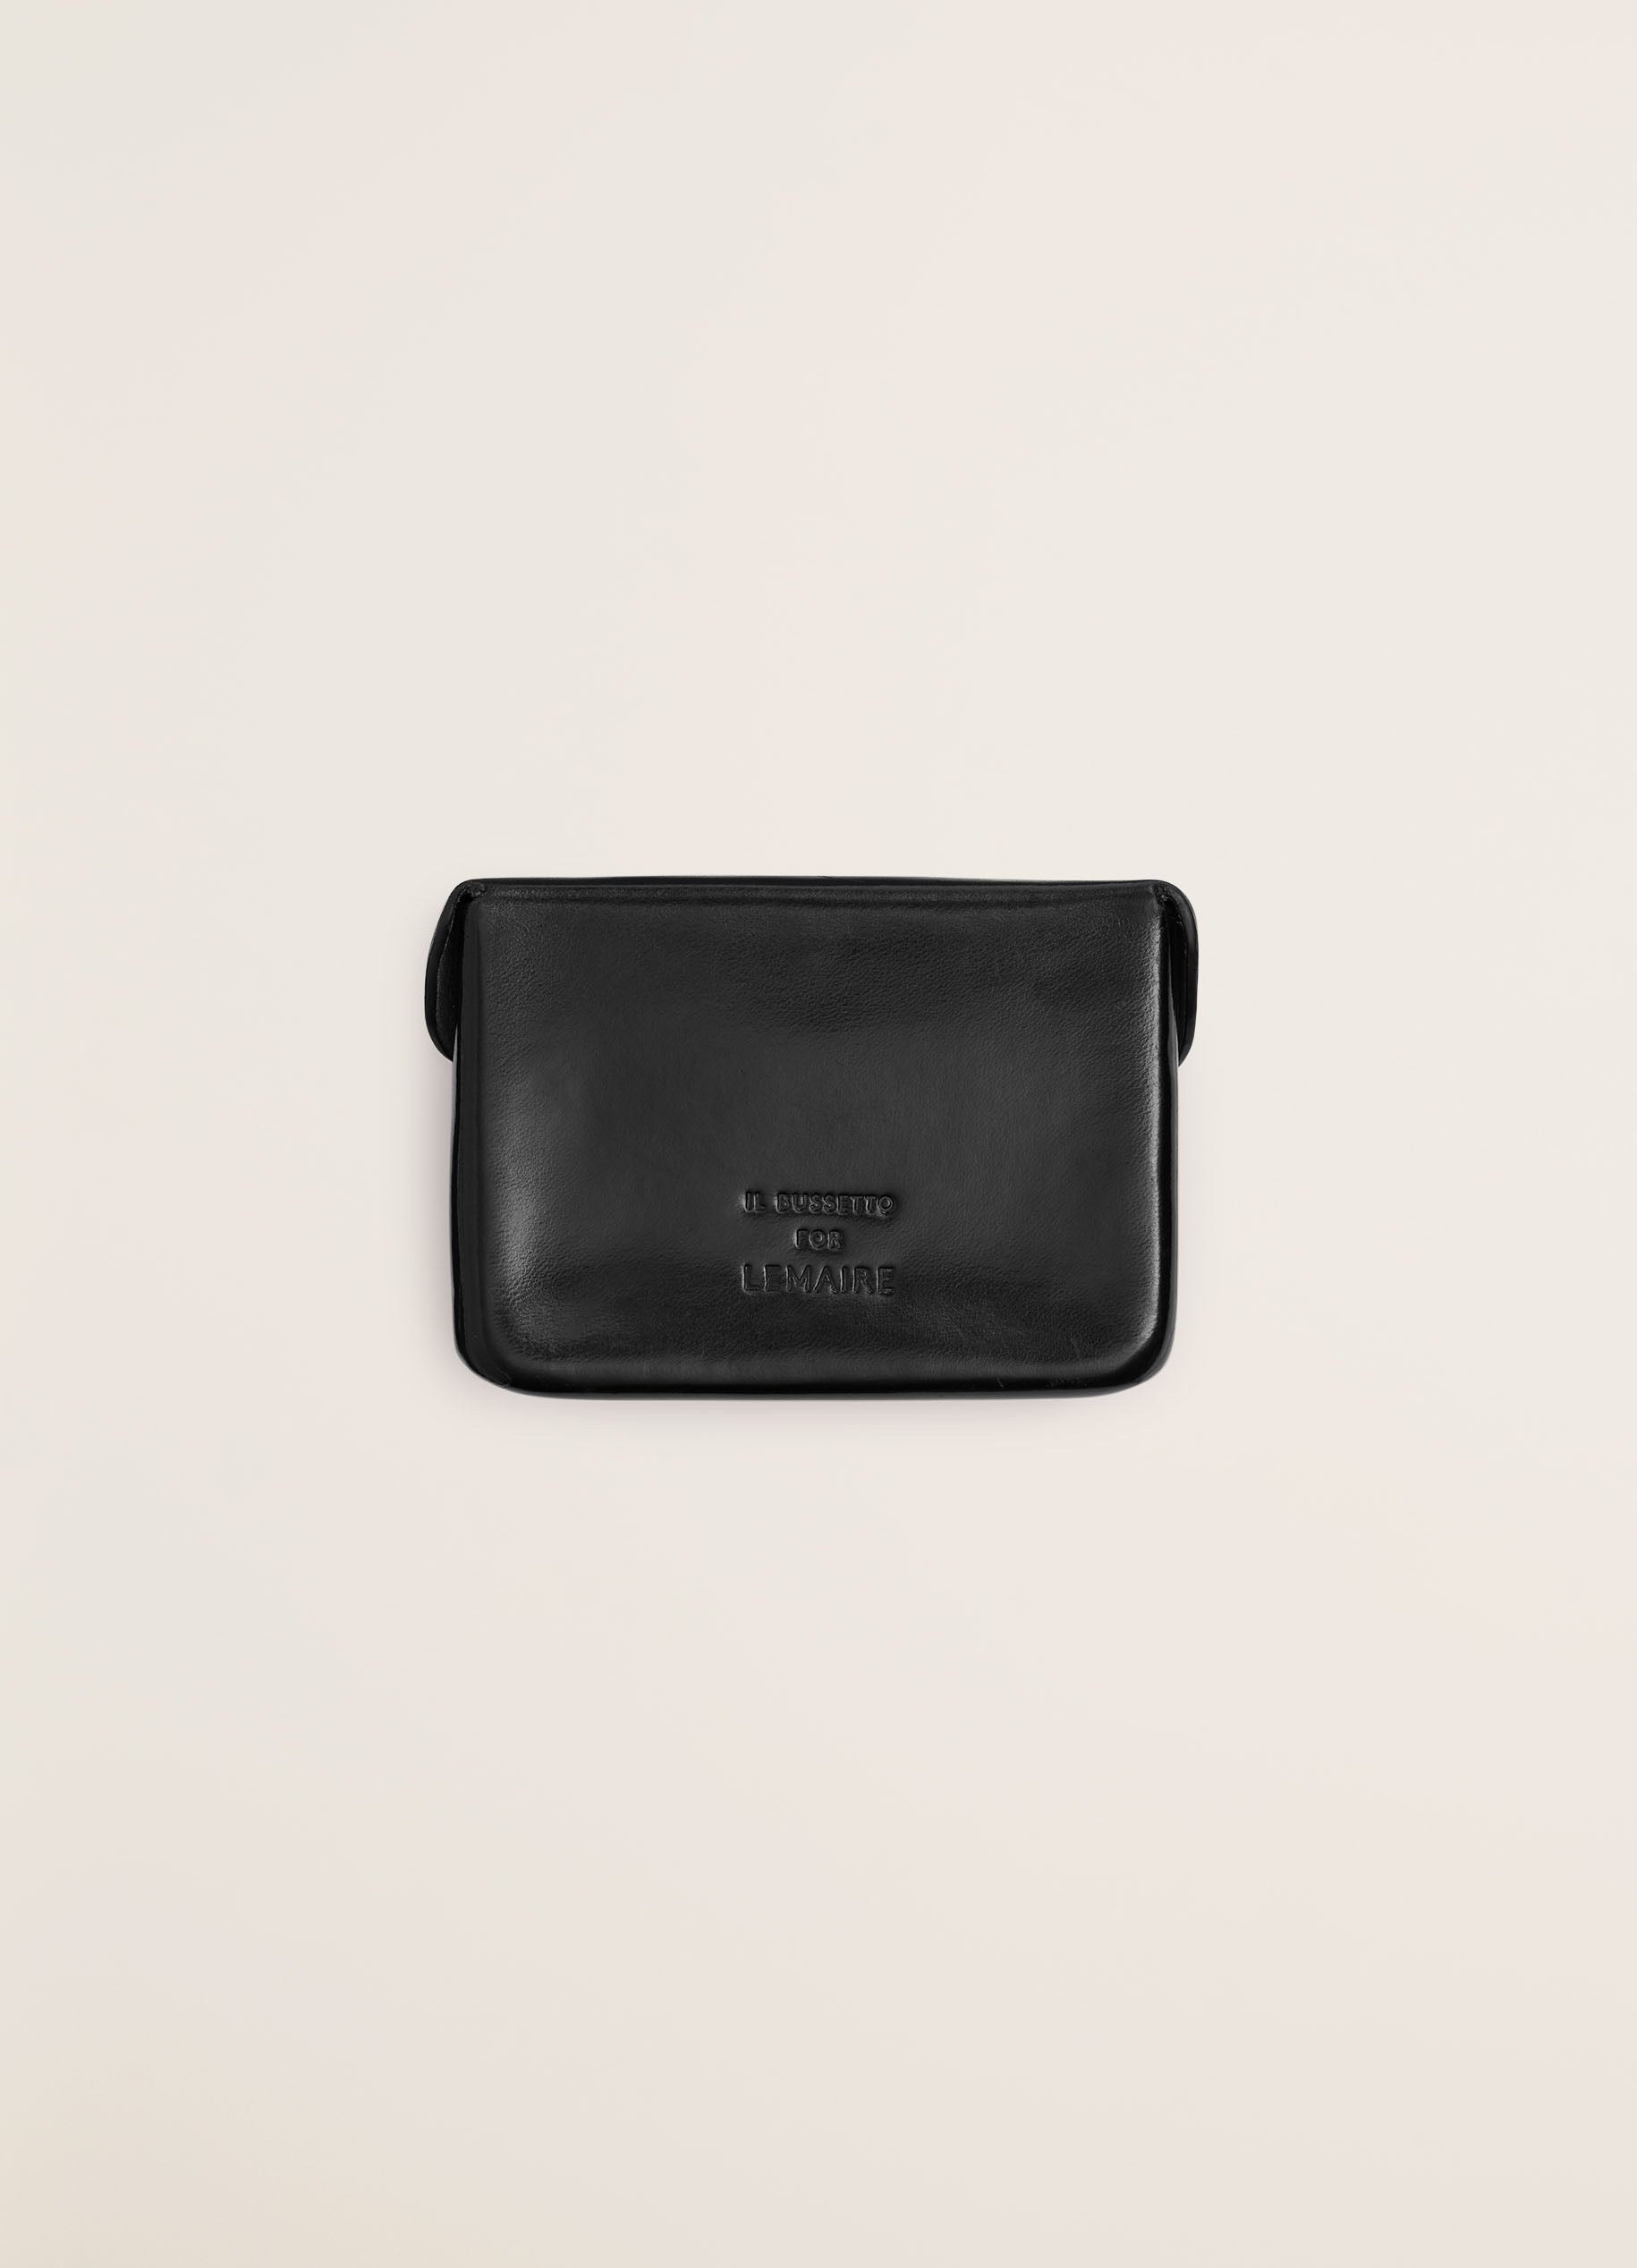 IL BUSSETTO FOR LEMAIRE CARD HOLDER - 3